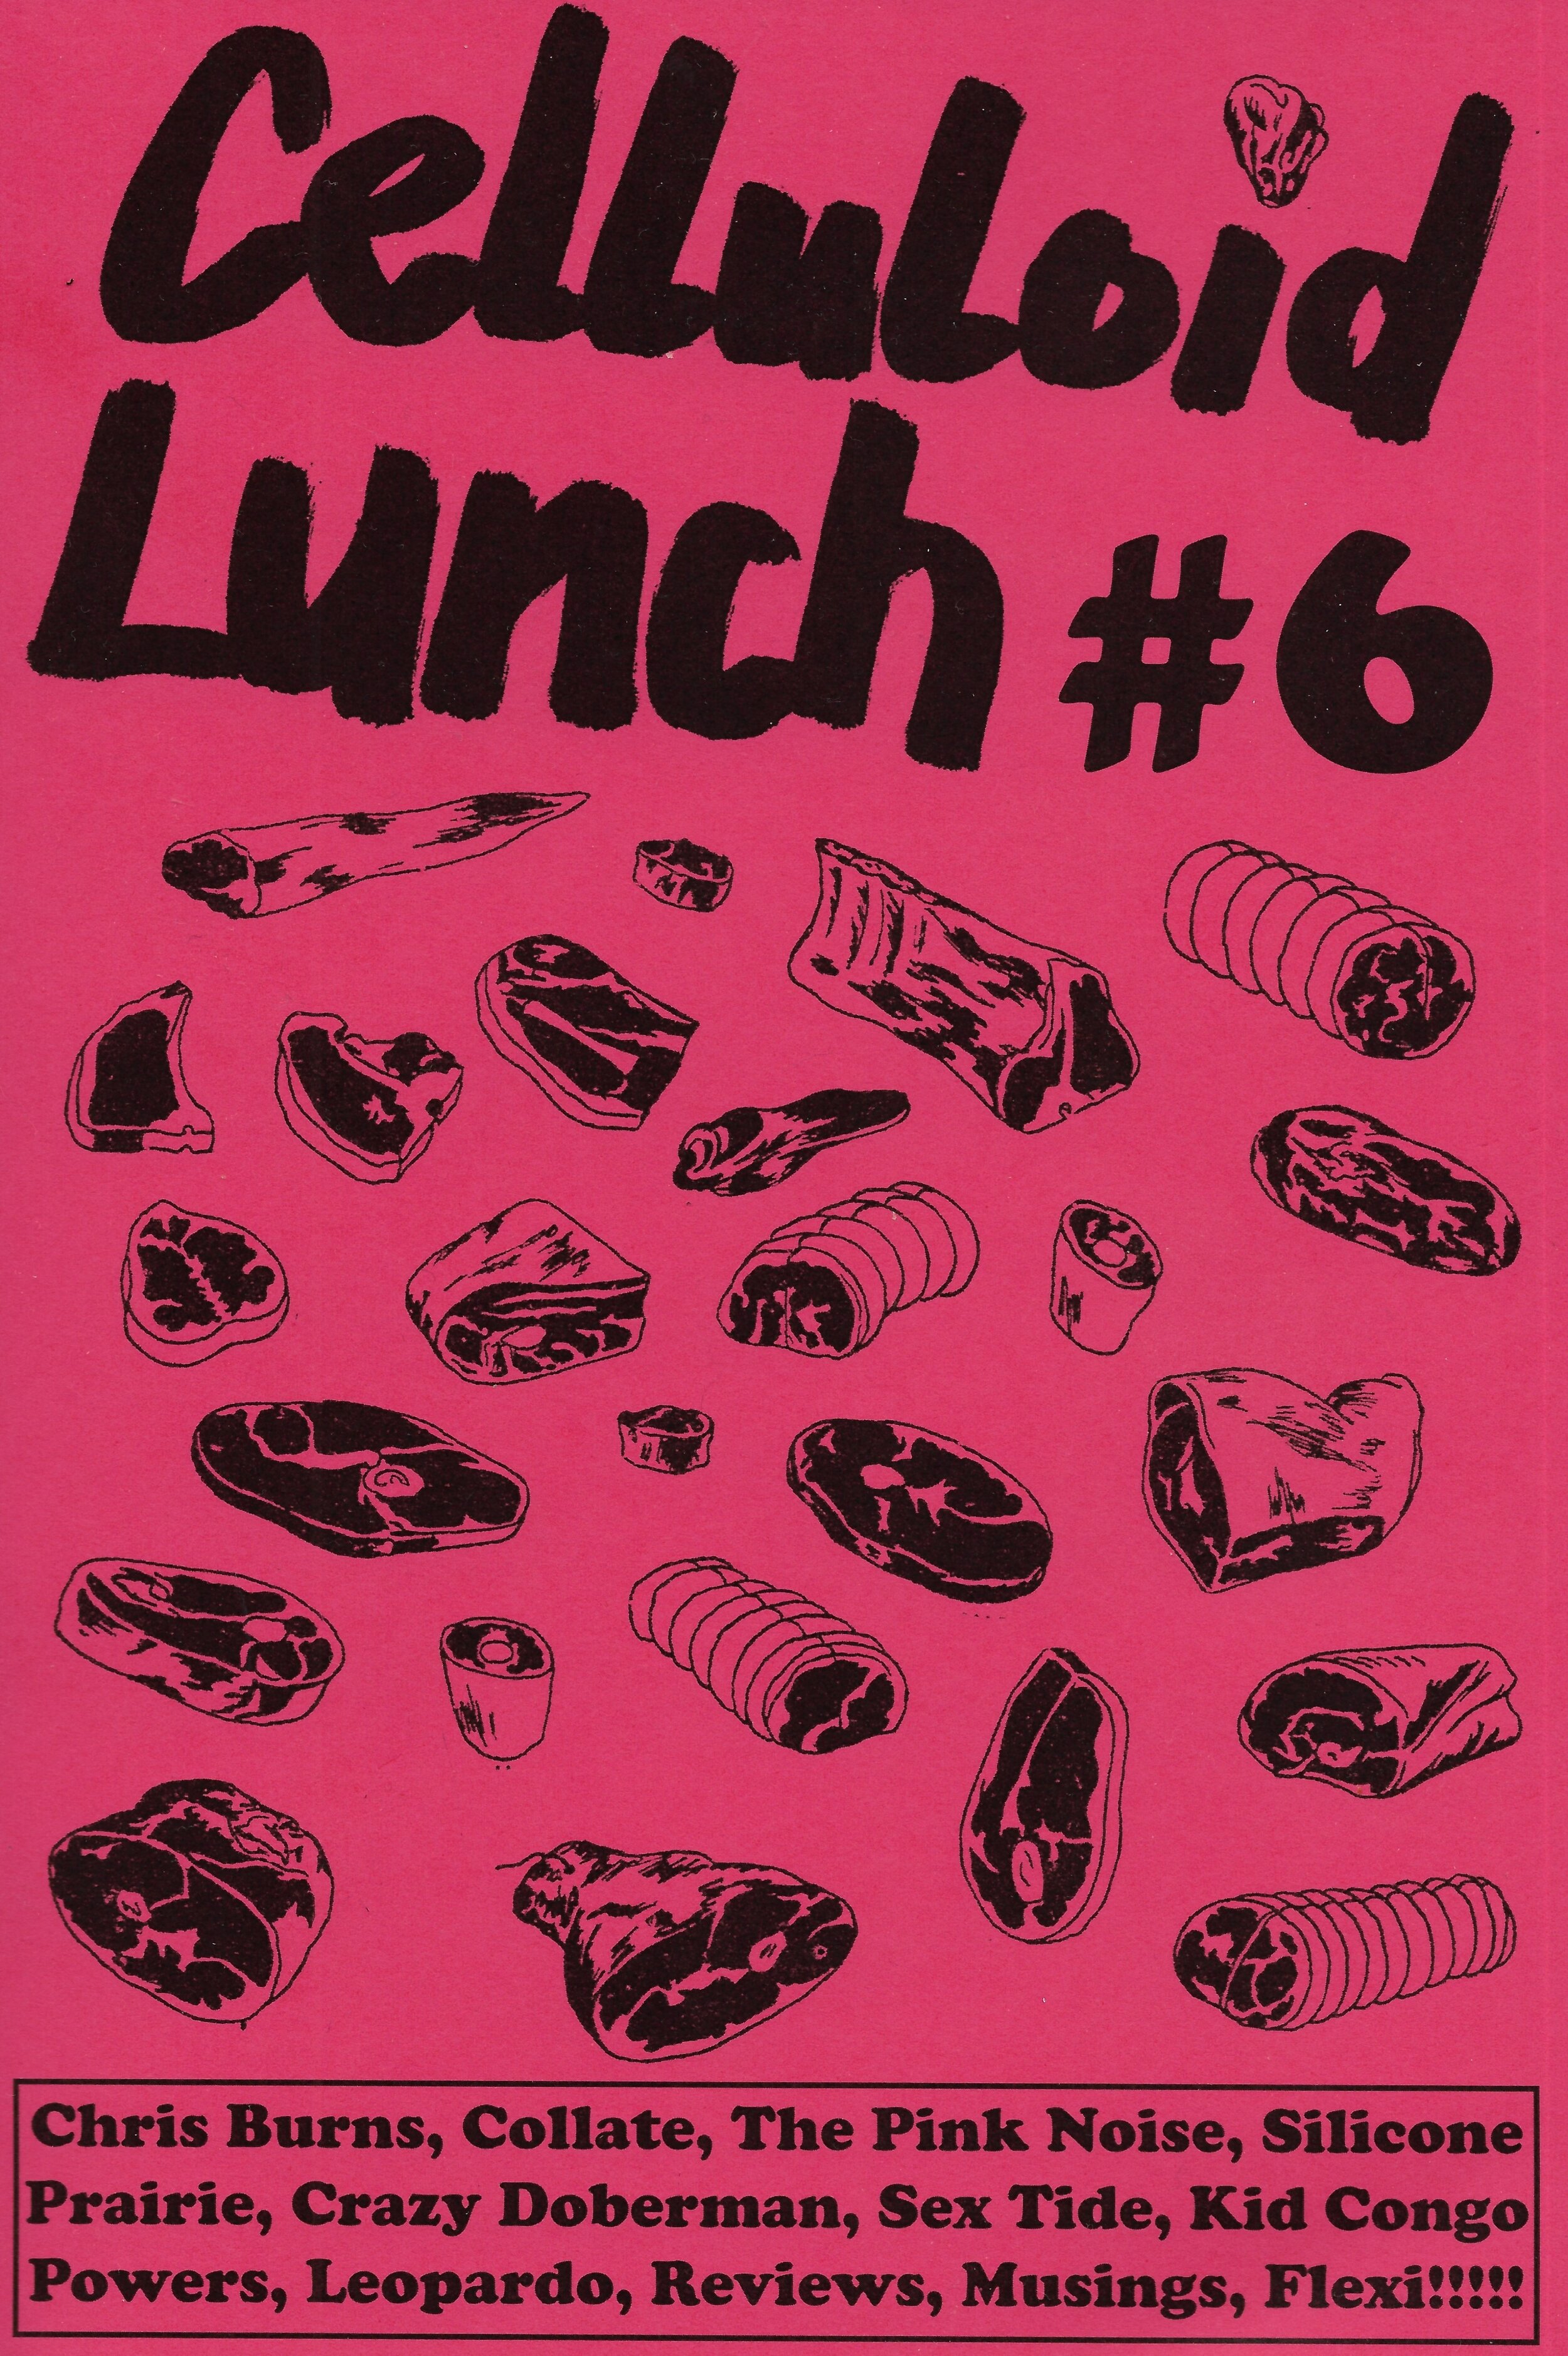 CELLULOID LUNCH #6 — Spacecase Records